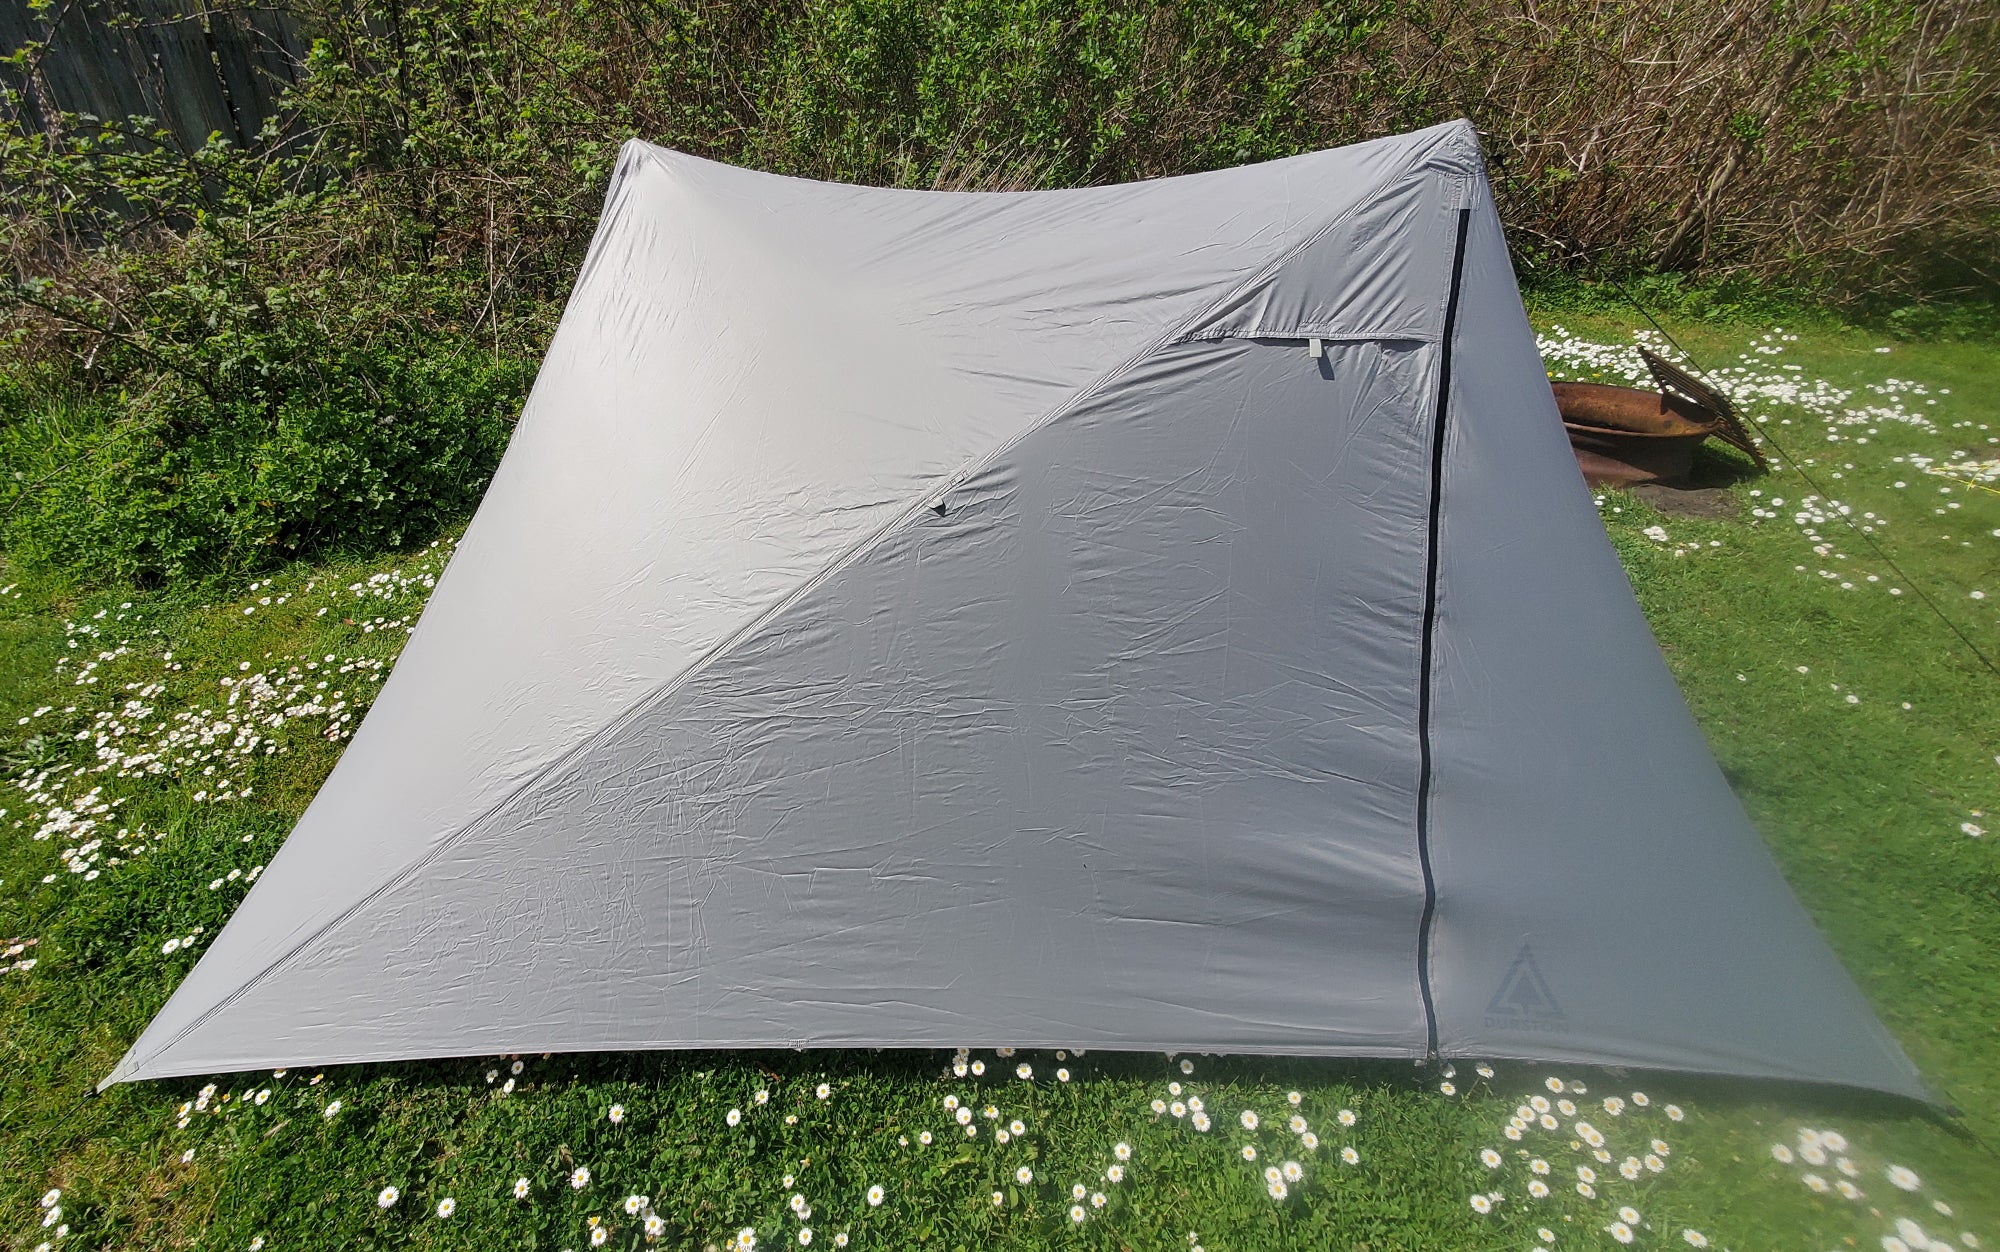 We tested the Durston X-Mid 1 Ultralight Shelter.